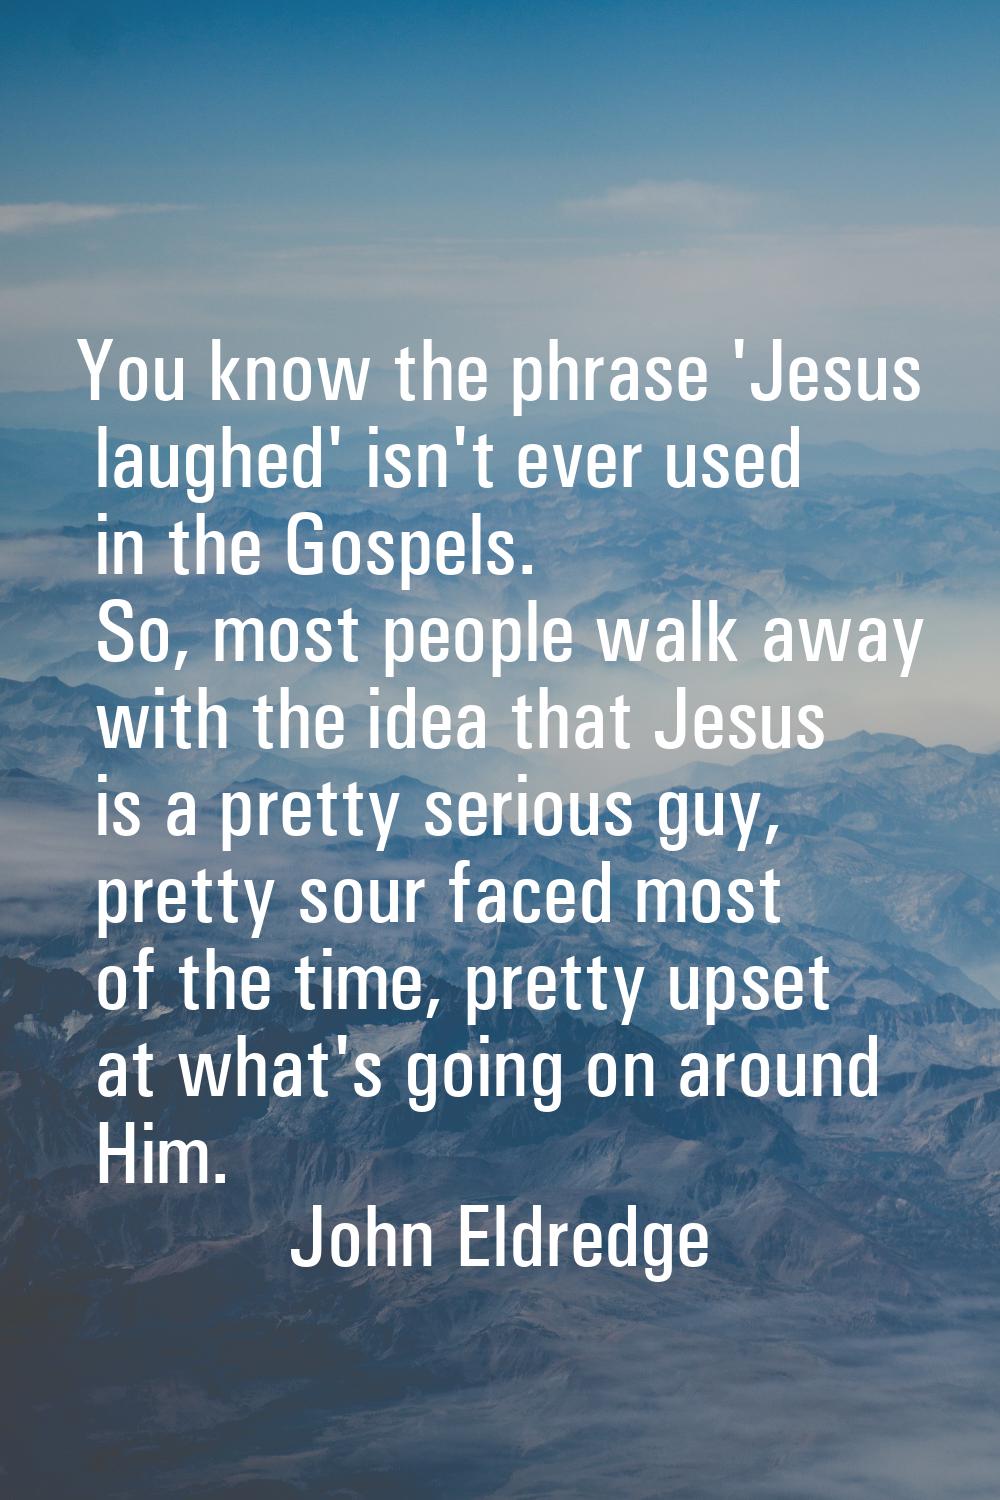 You know the phrase 'Jesus laughed' isn't ever used in the Gospels. So, most people walk away with 